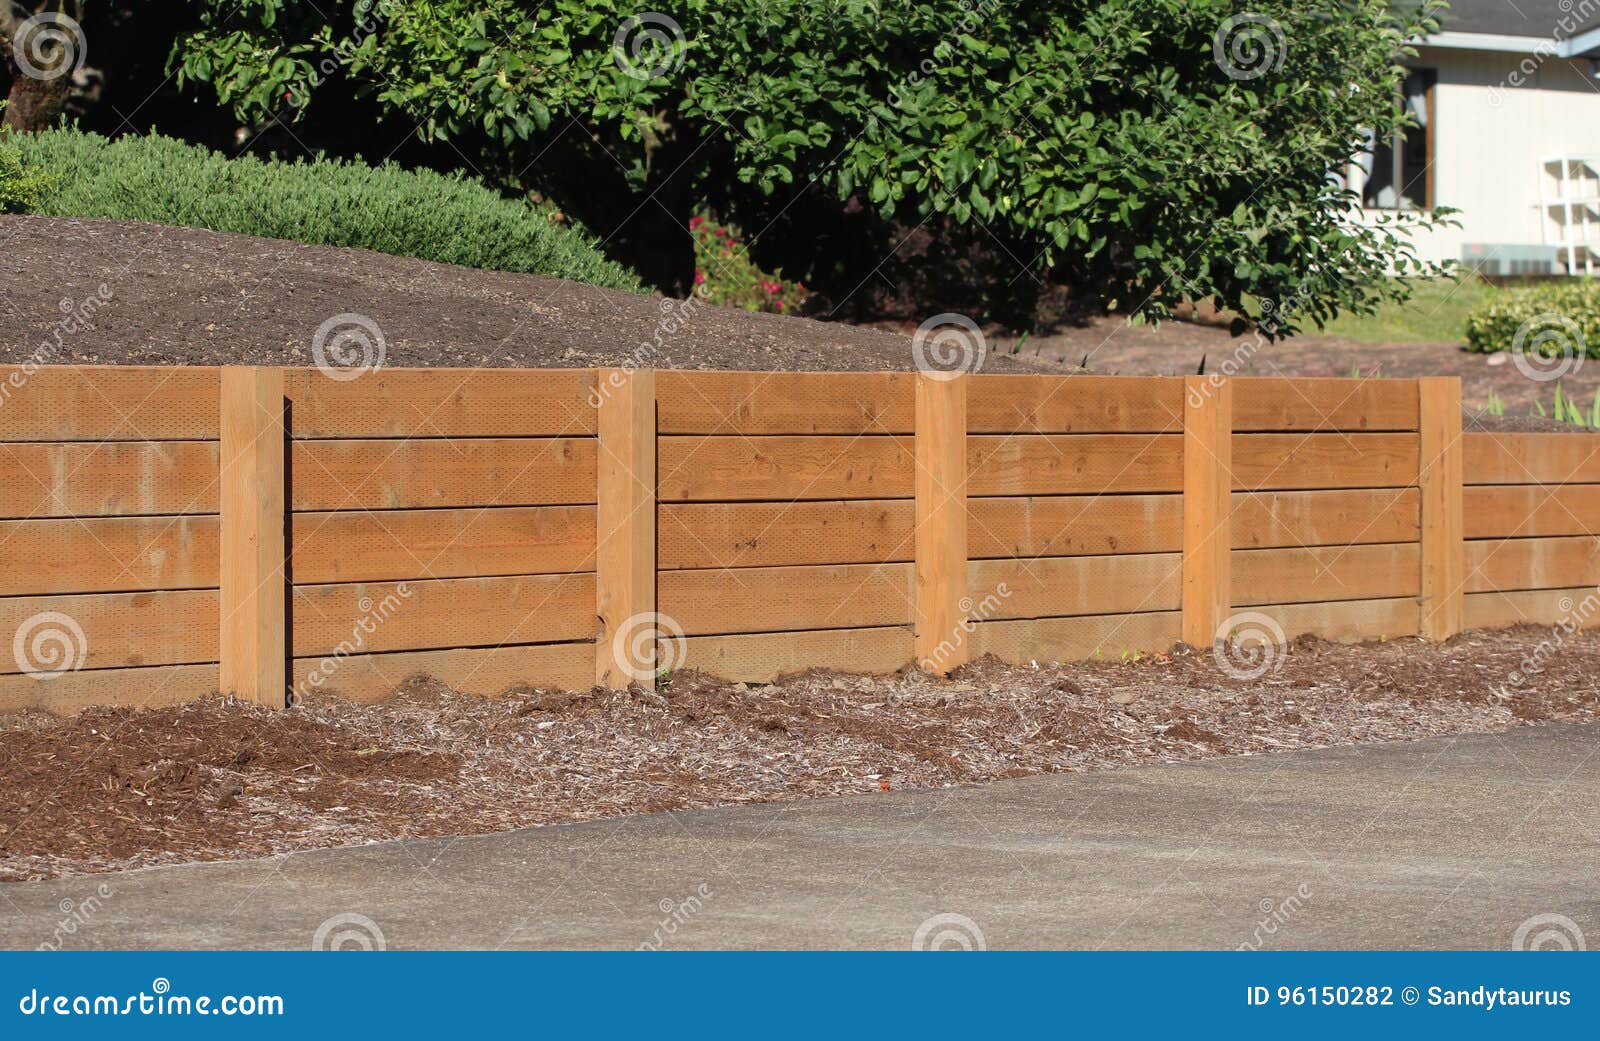 retaining wall made of wood